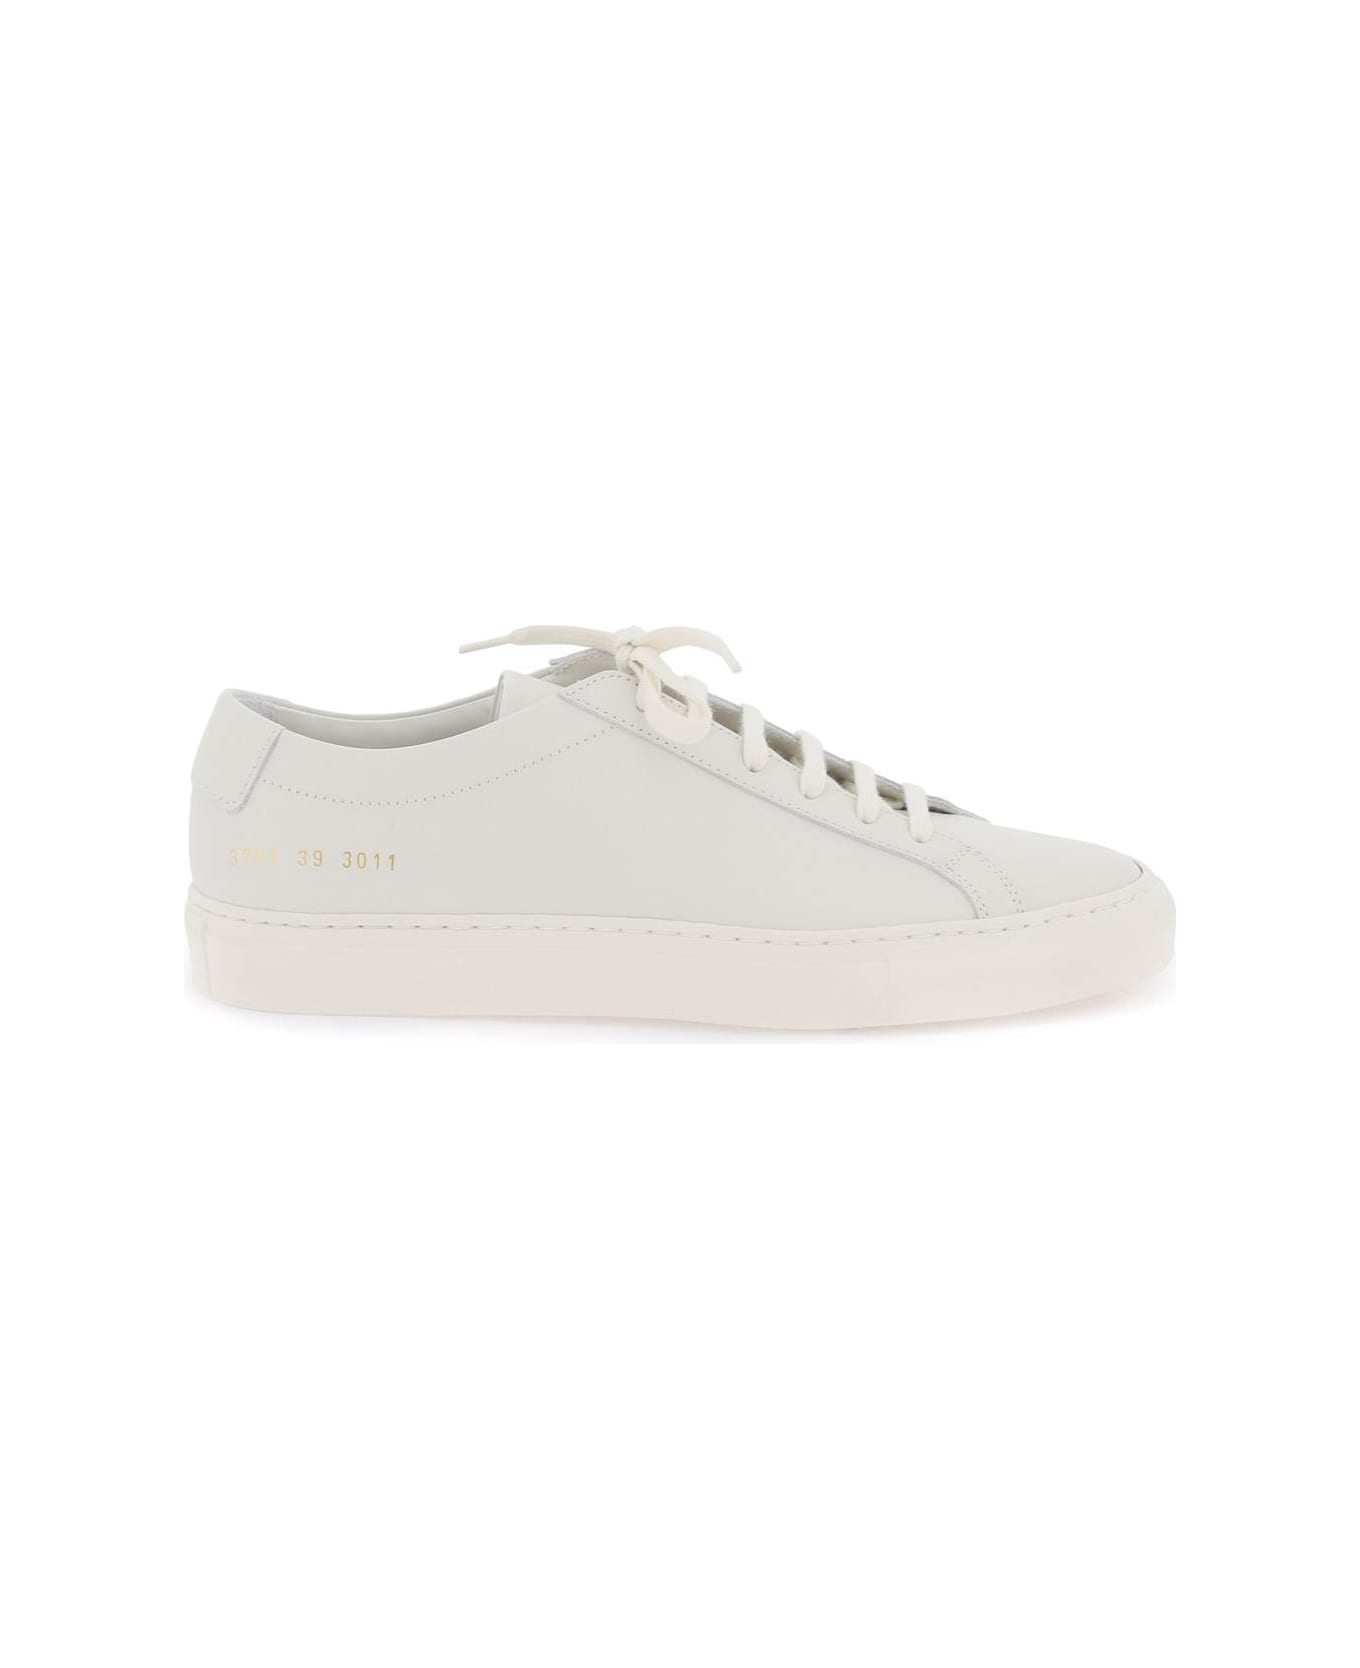 Common Projects Original Achilles Leather Sneakers - Warm white スニーカー